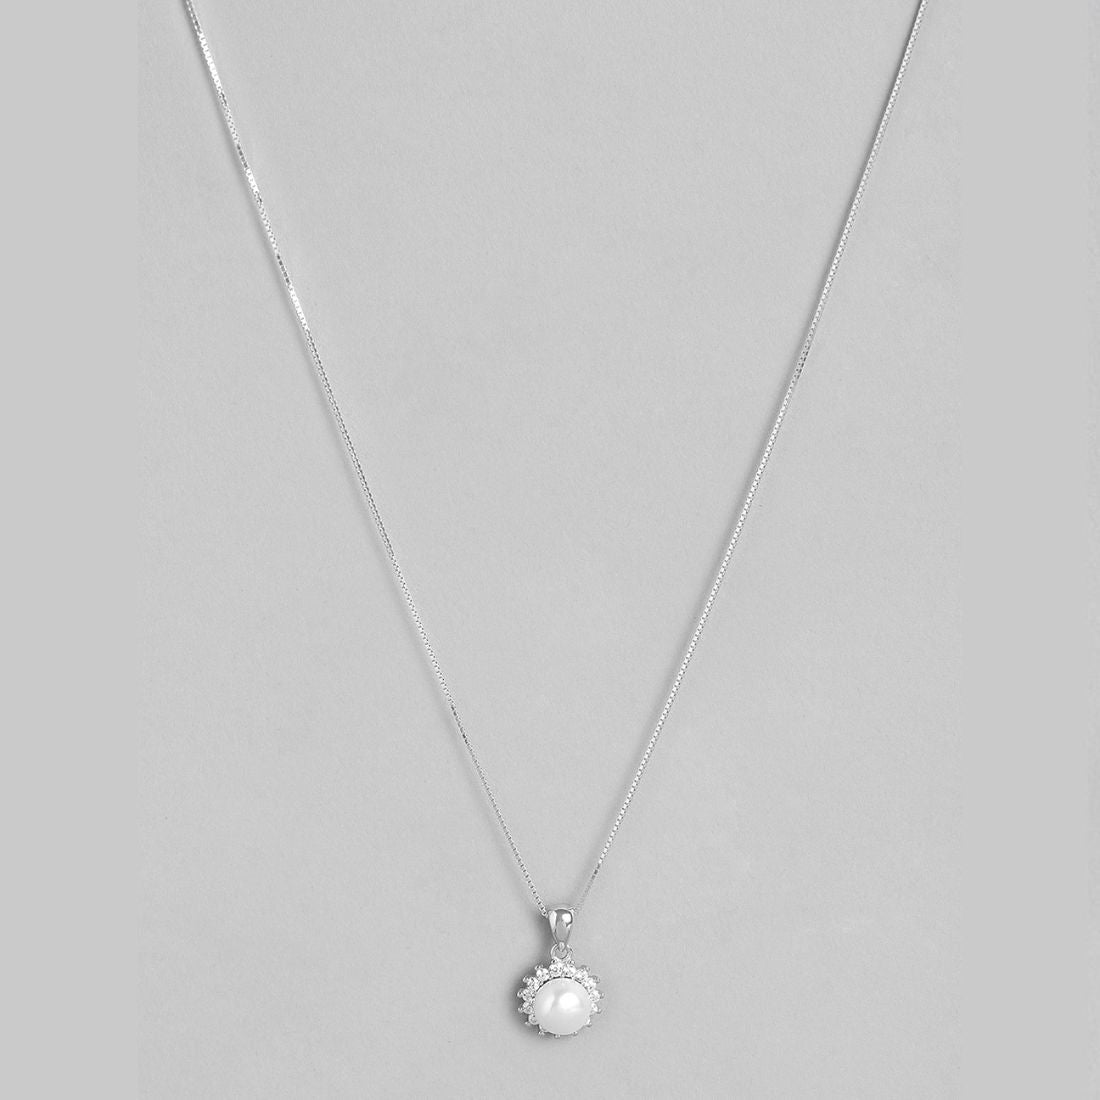 Twinkling Grace: Cubic Zirconia Rhodium Plated 925 Sterling Silver Pendent